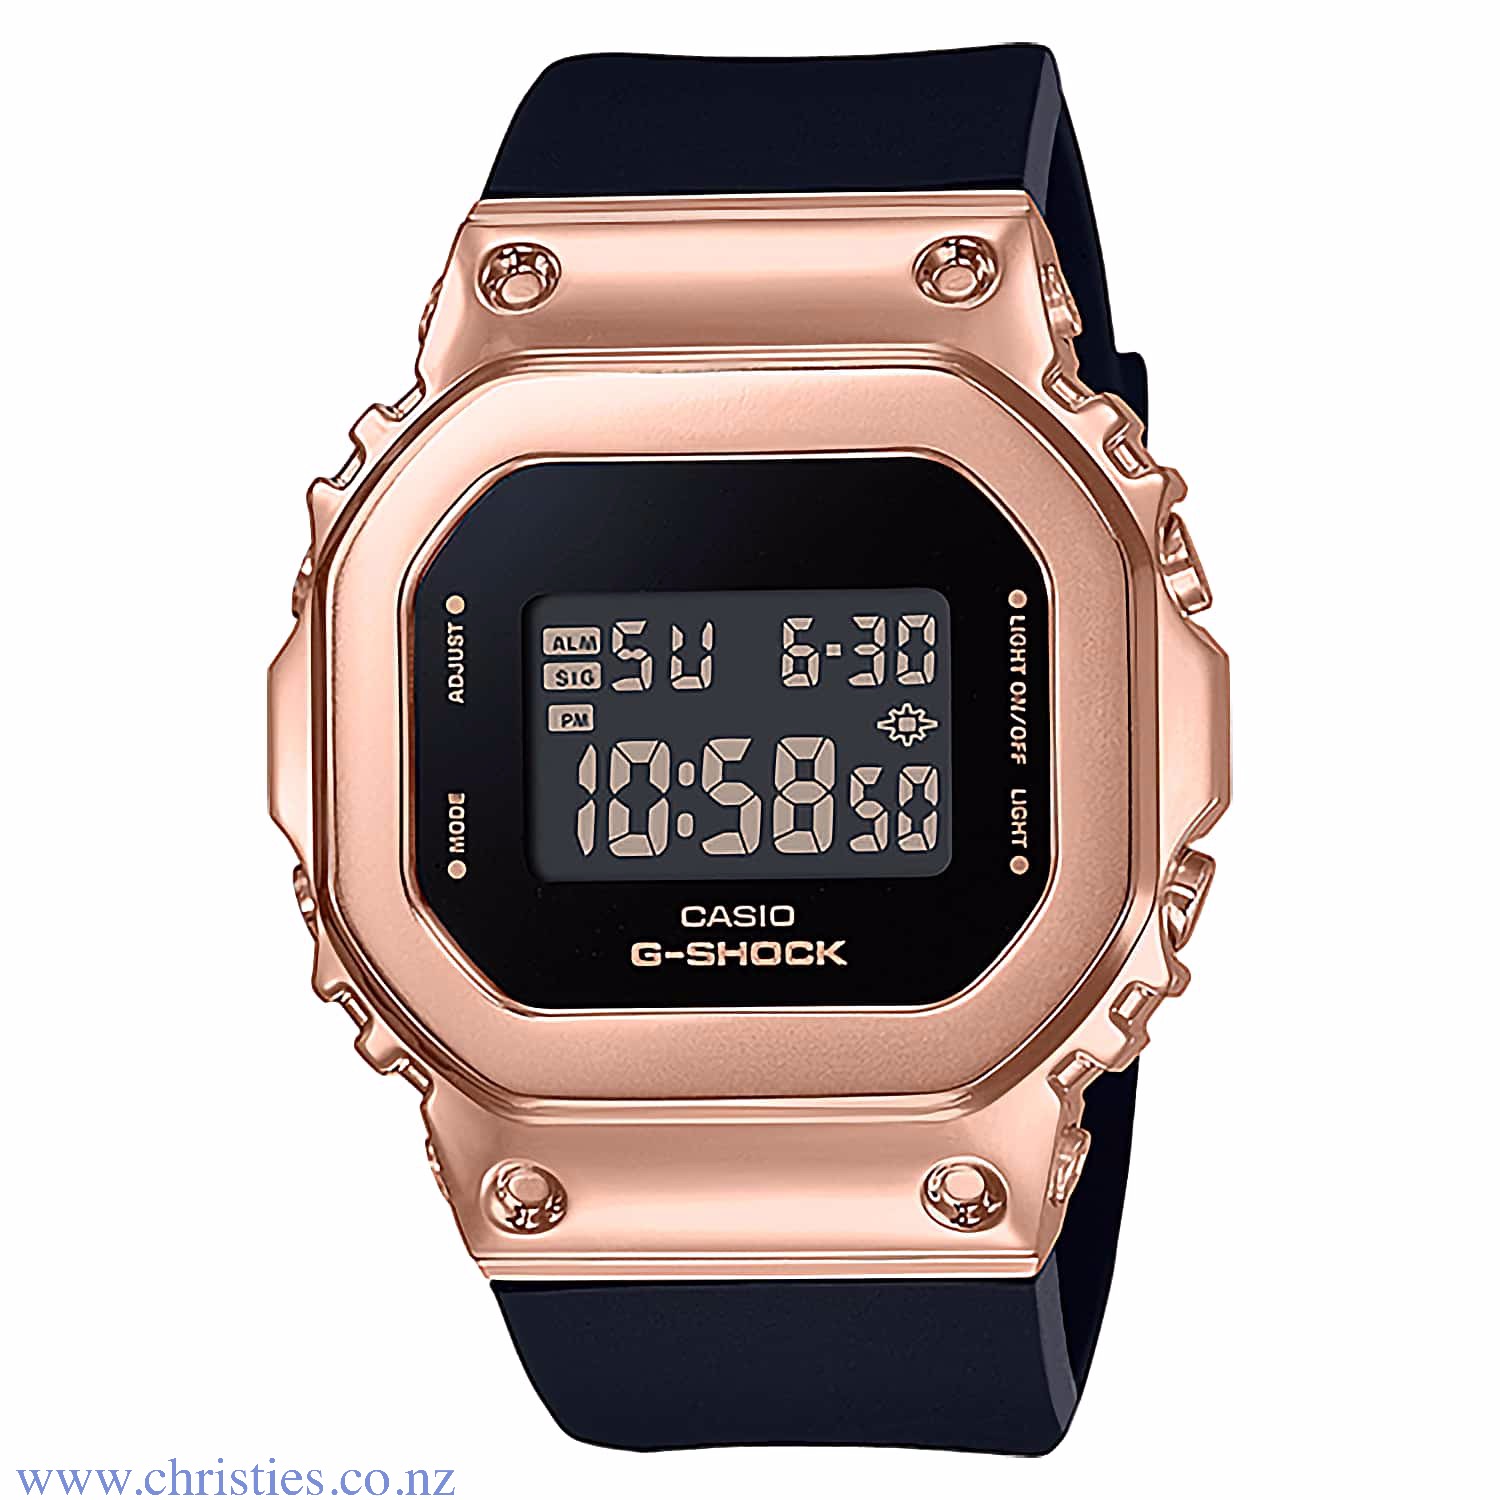 GMS5600PG-1 G-Shock Womens Pink Gold Bezel Watch. Introducing new compact G-SHOCK models that are great choices for women who prefer mannish G-SHOCK styling. The iconic square design of the 5600 Series with a metal-covered bezel. All the shock resistance 